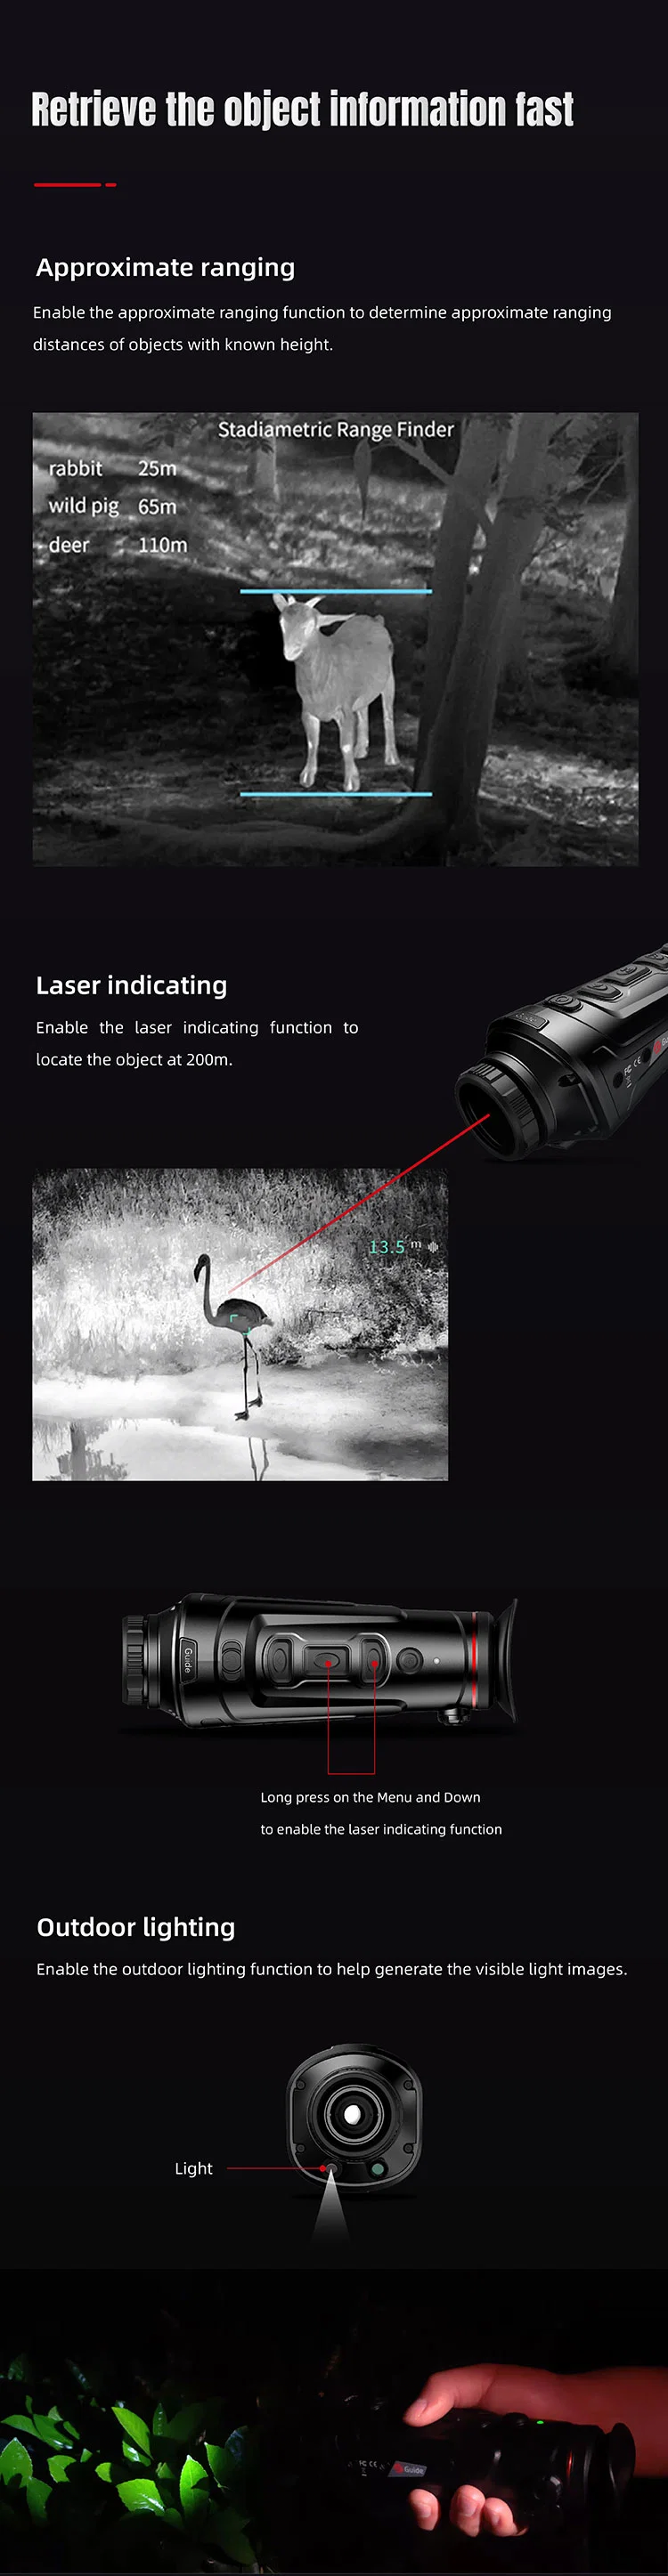 Monocular Imaging Night Vision Guide Excellent Imaging Performance Thermal Spotting Scope